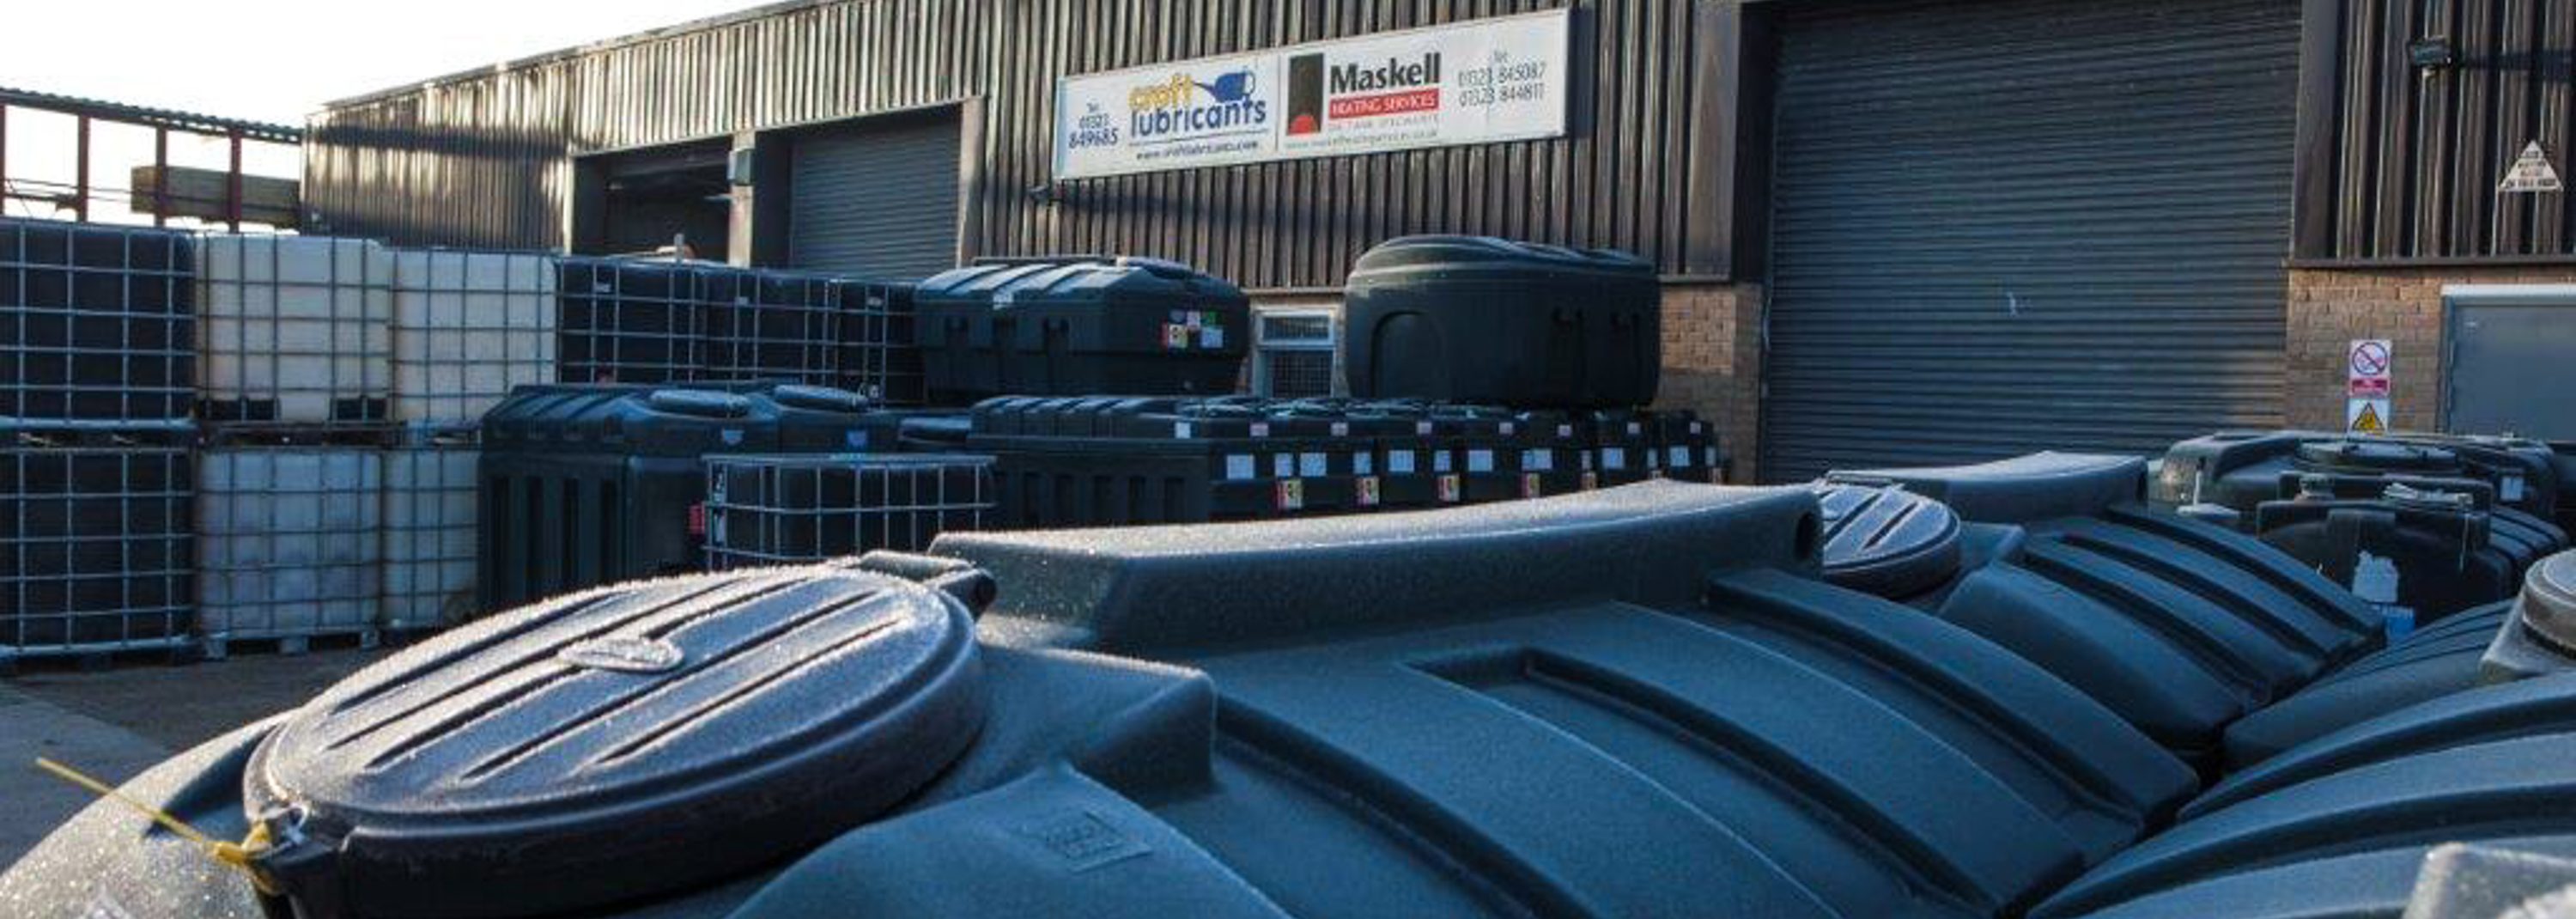 Maskell Heating Services - Oil Tank Specialists